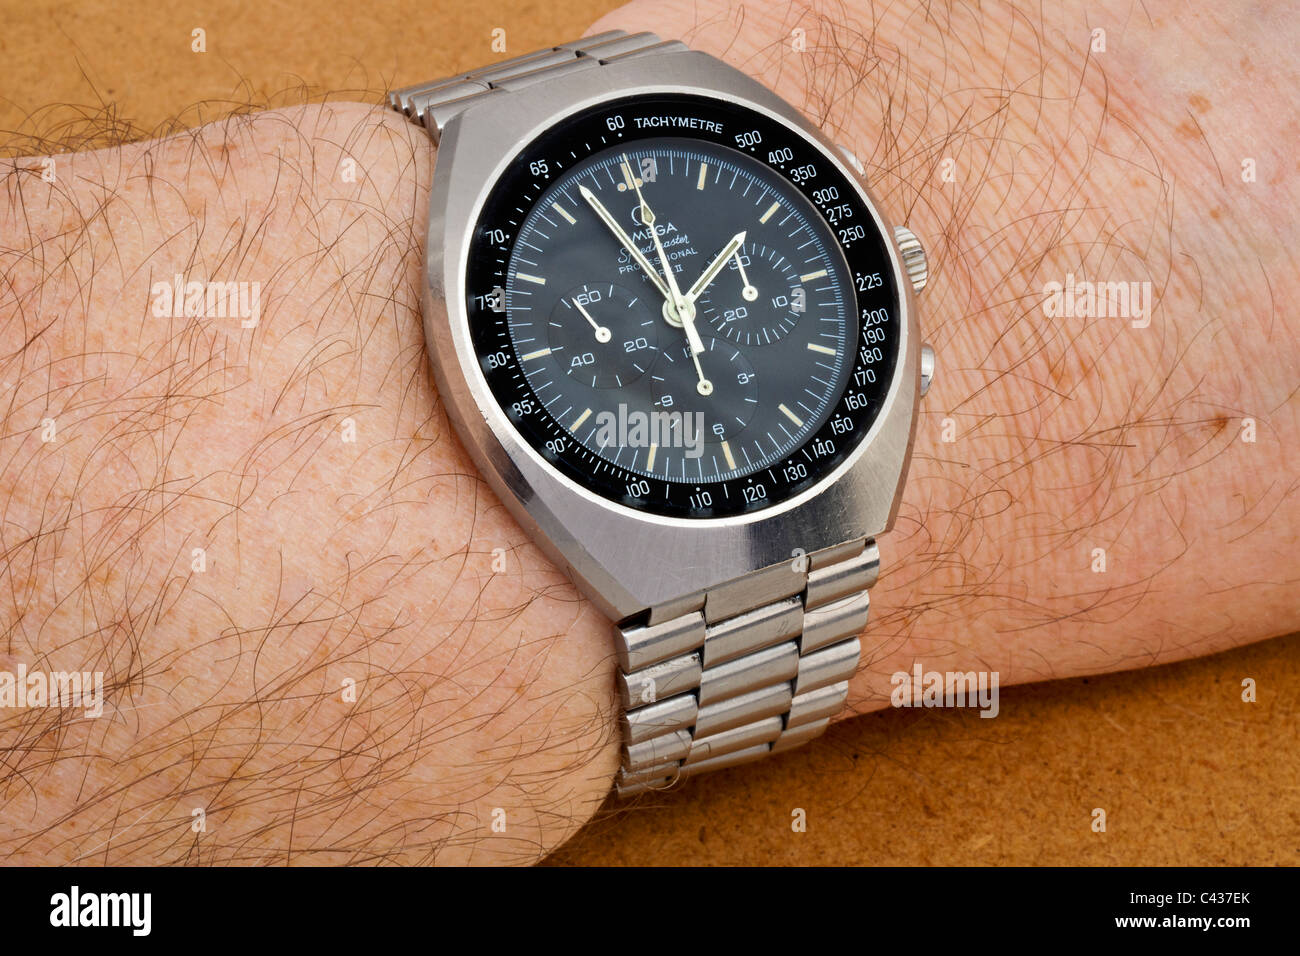 Omega Speedmaster Professional Mark II stainless steel Swiss chronograph wrist watch with black dial and white hands JMH4896 Stock Photo